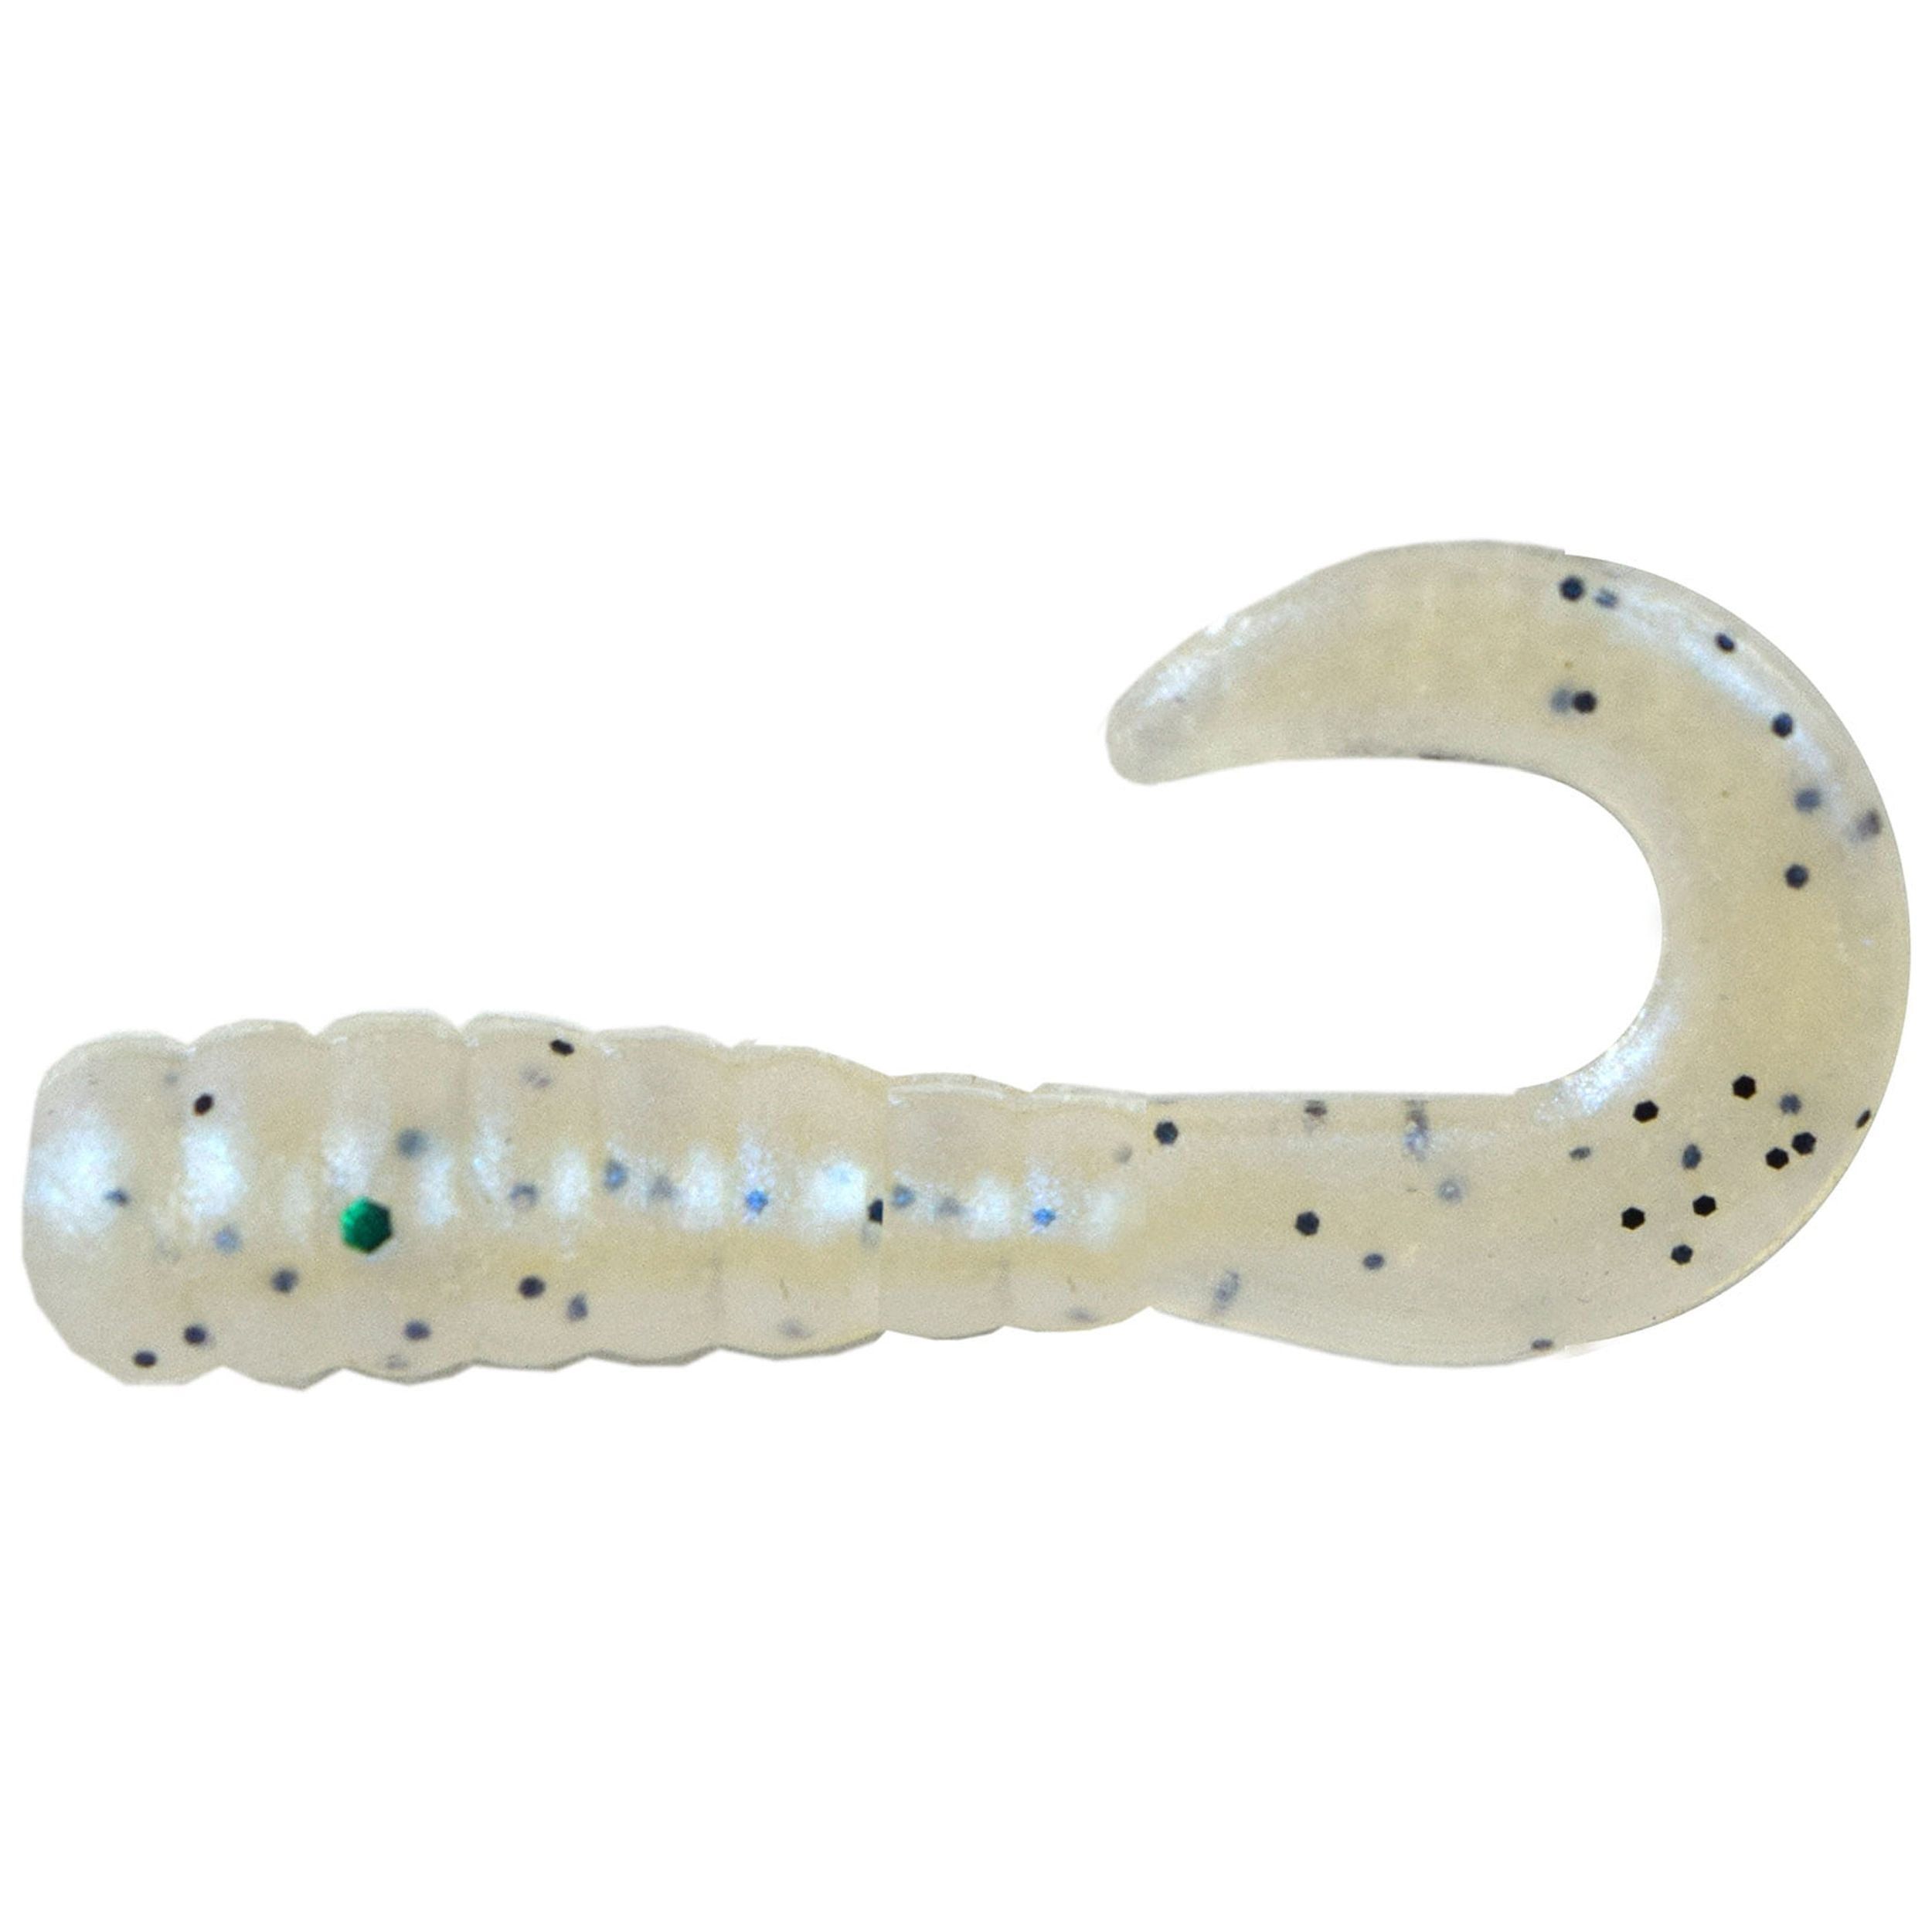 1-1/2 Inch Curly Tail Grub, 6 colors, Total 120 Grubs, bass walleye pan fish